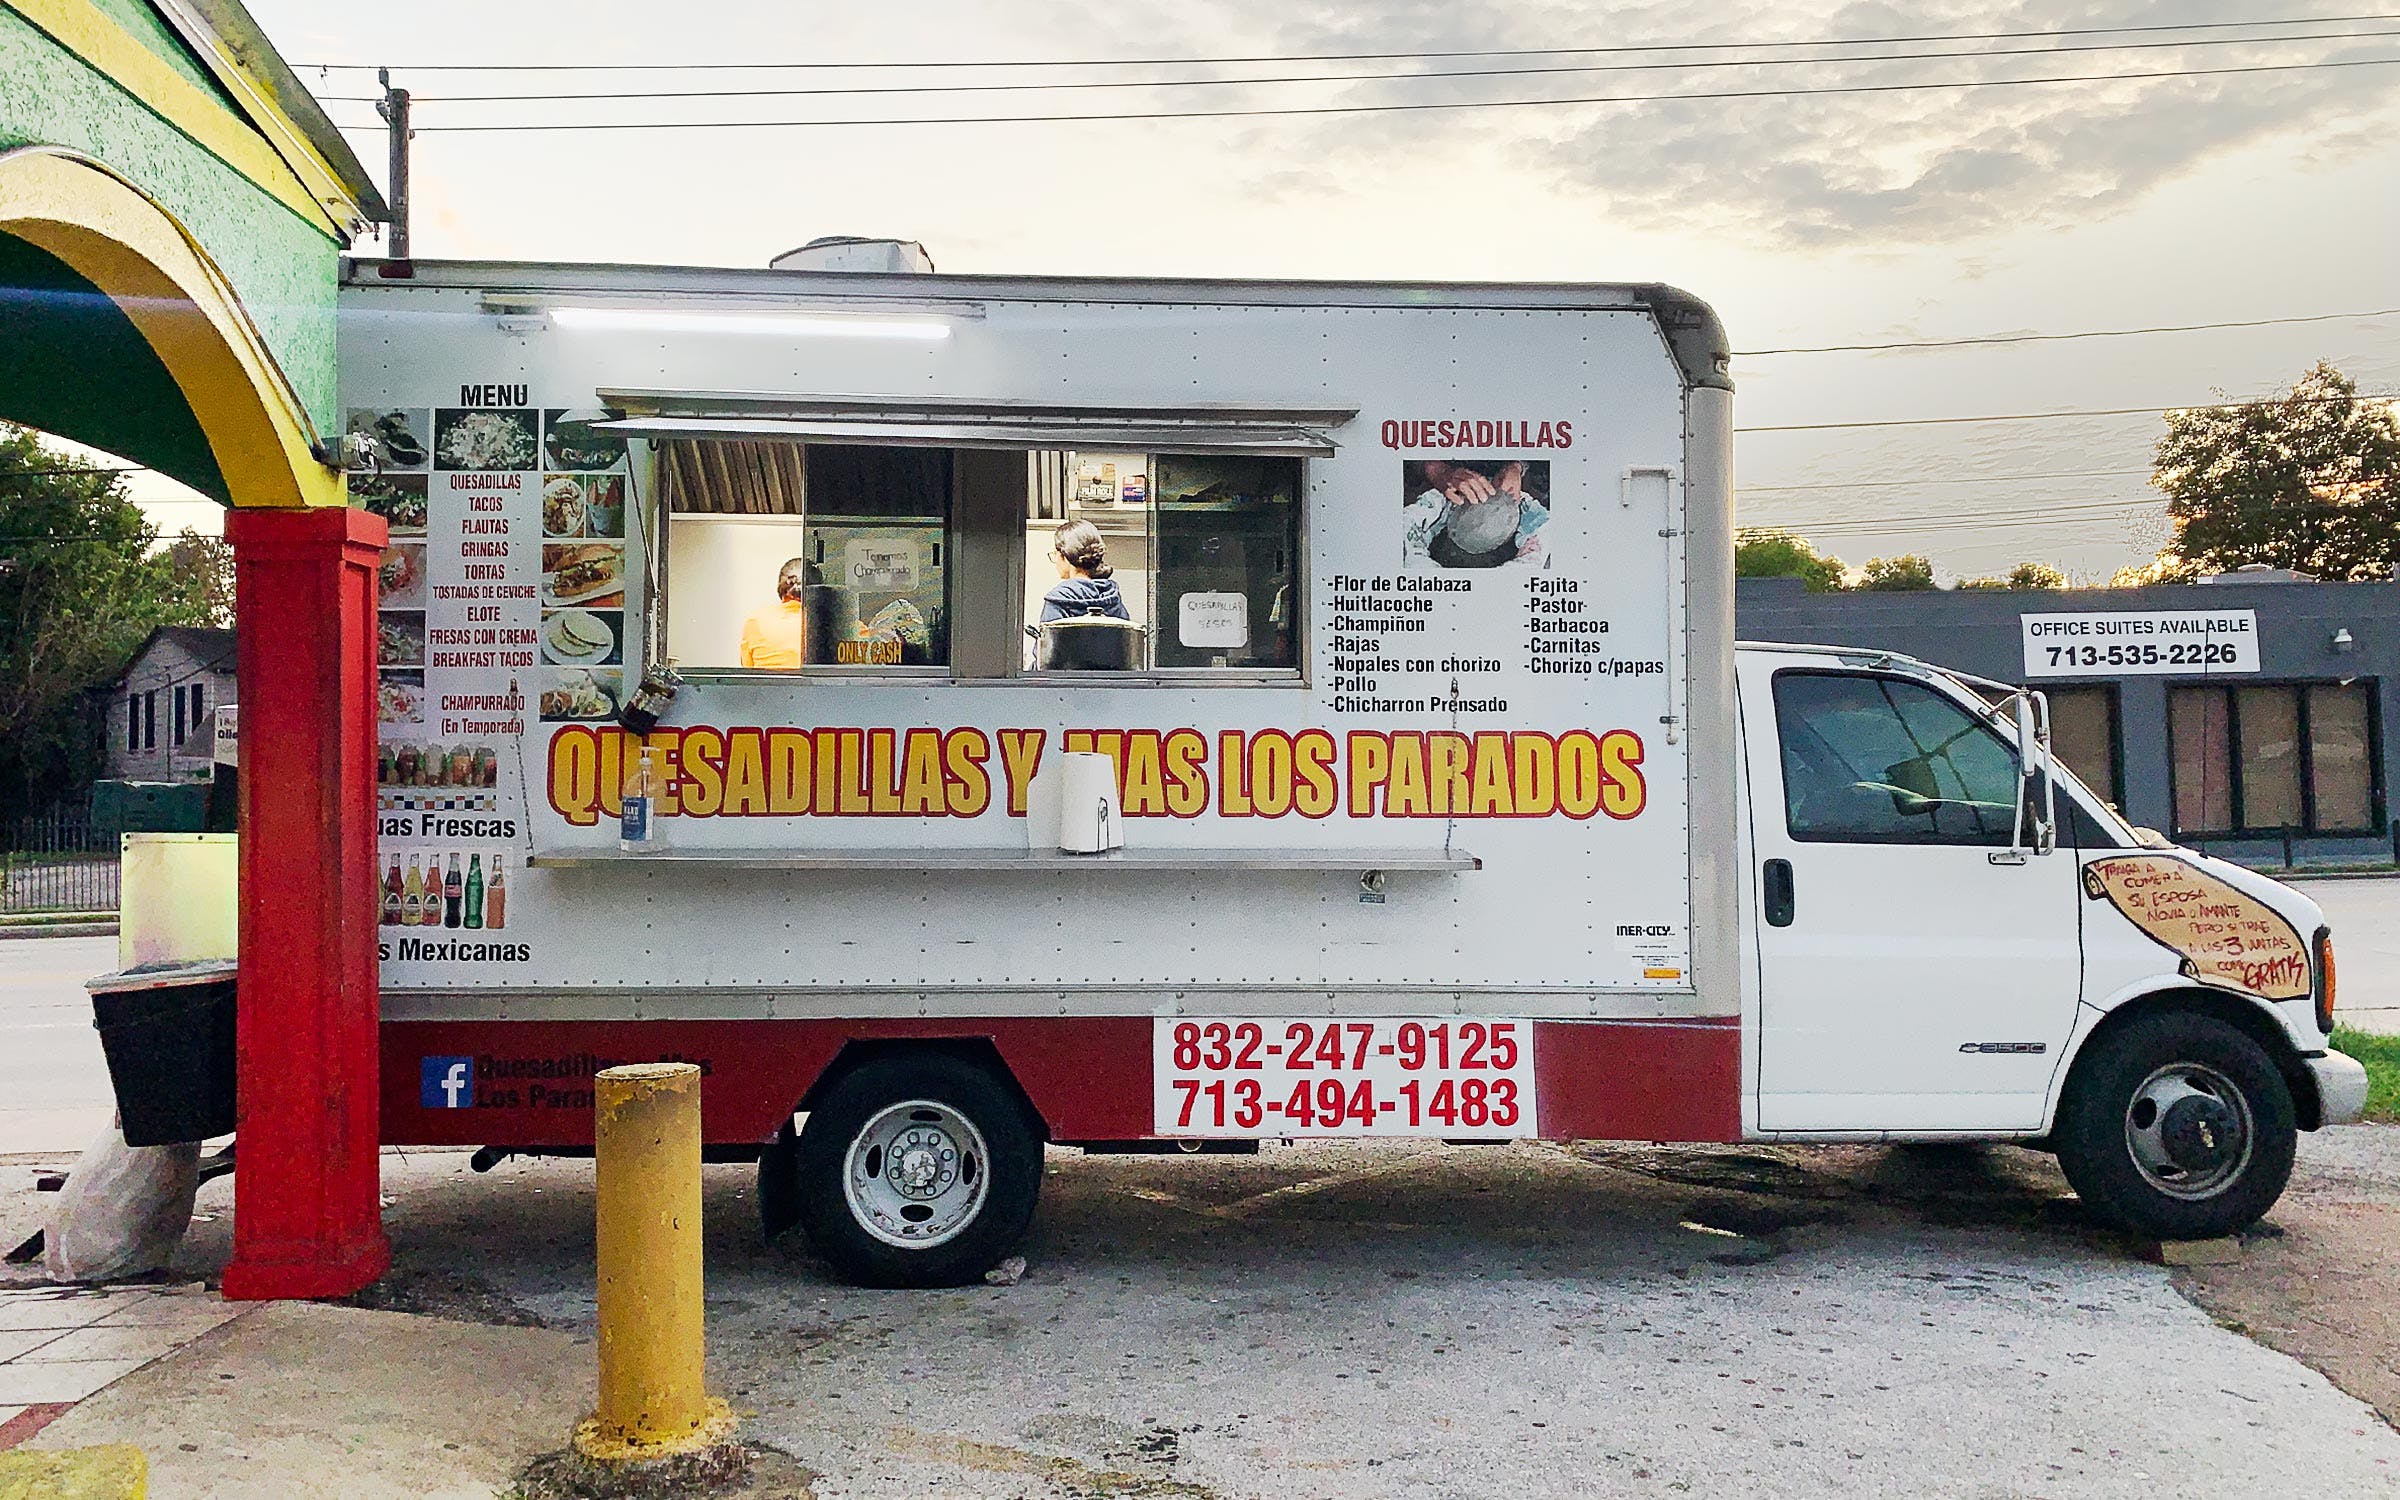 Purchase a Reliable Food Truck